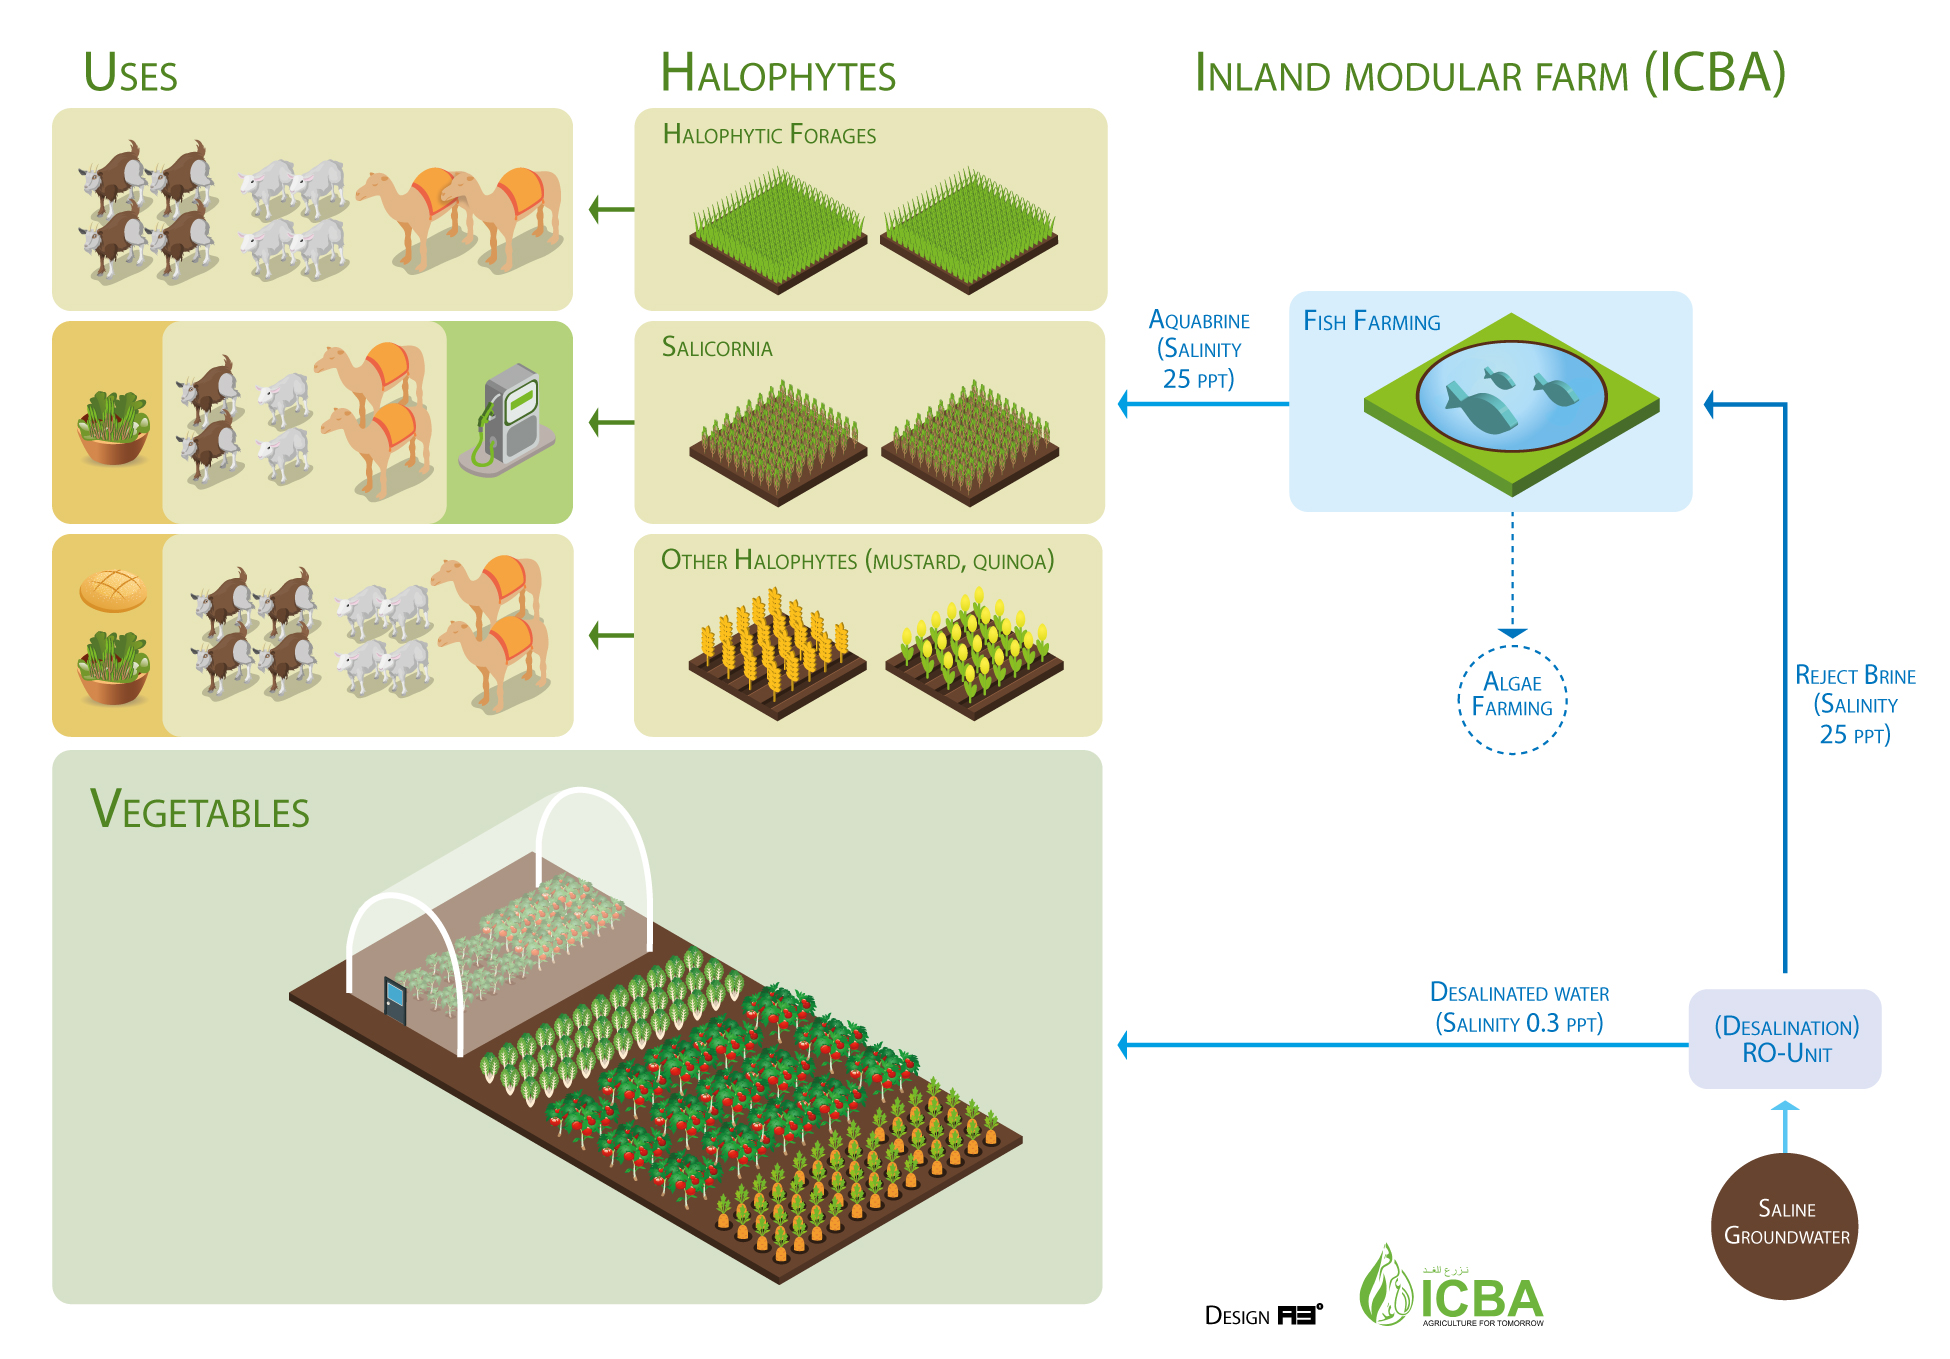 Figure 1. Integrated farm developed at ICBA’s experimental station (inland modular farm) ©ICBA